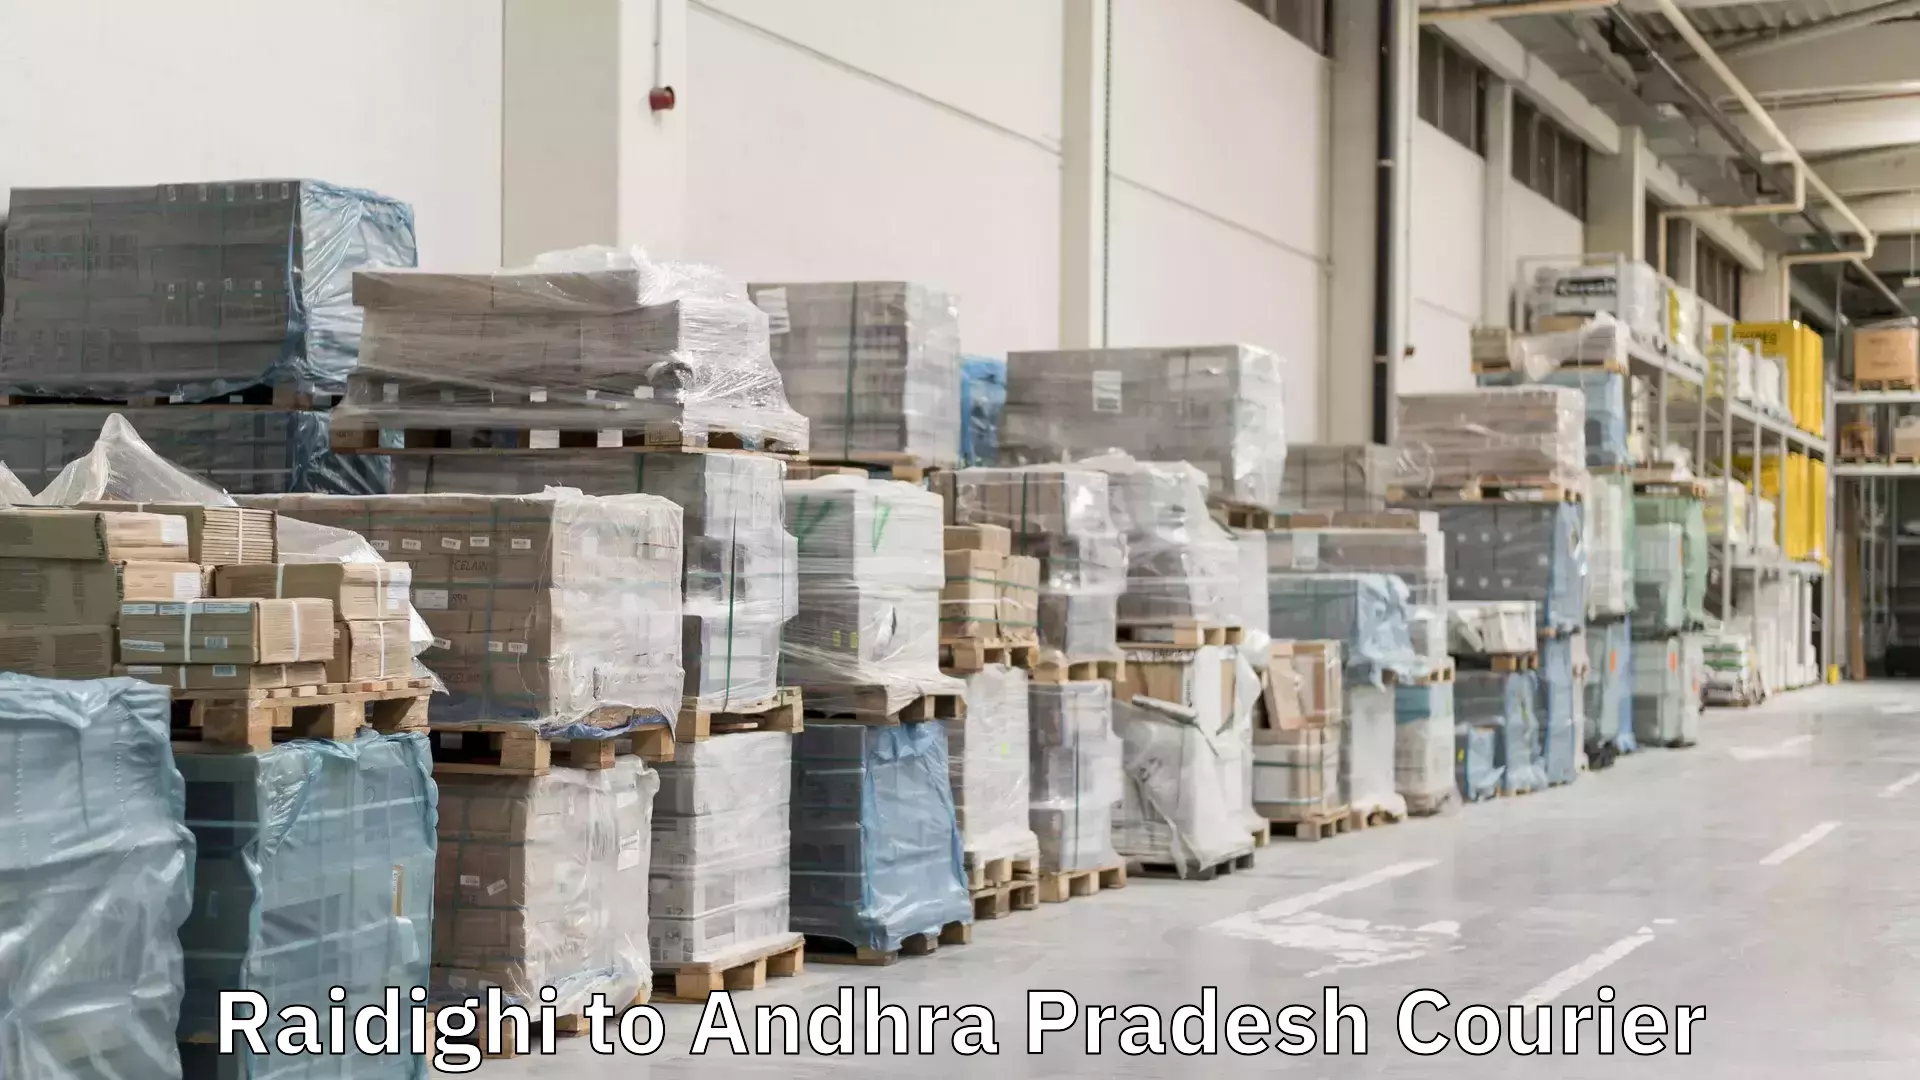 Small parcel delivery in Raidighi to Andhra Pradesh